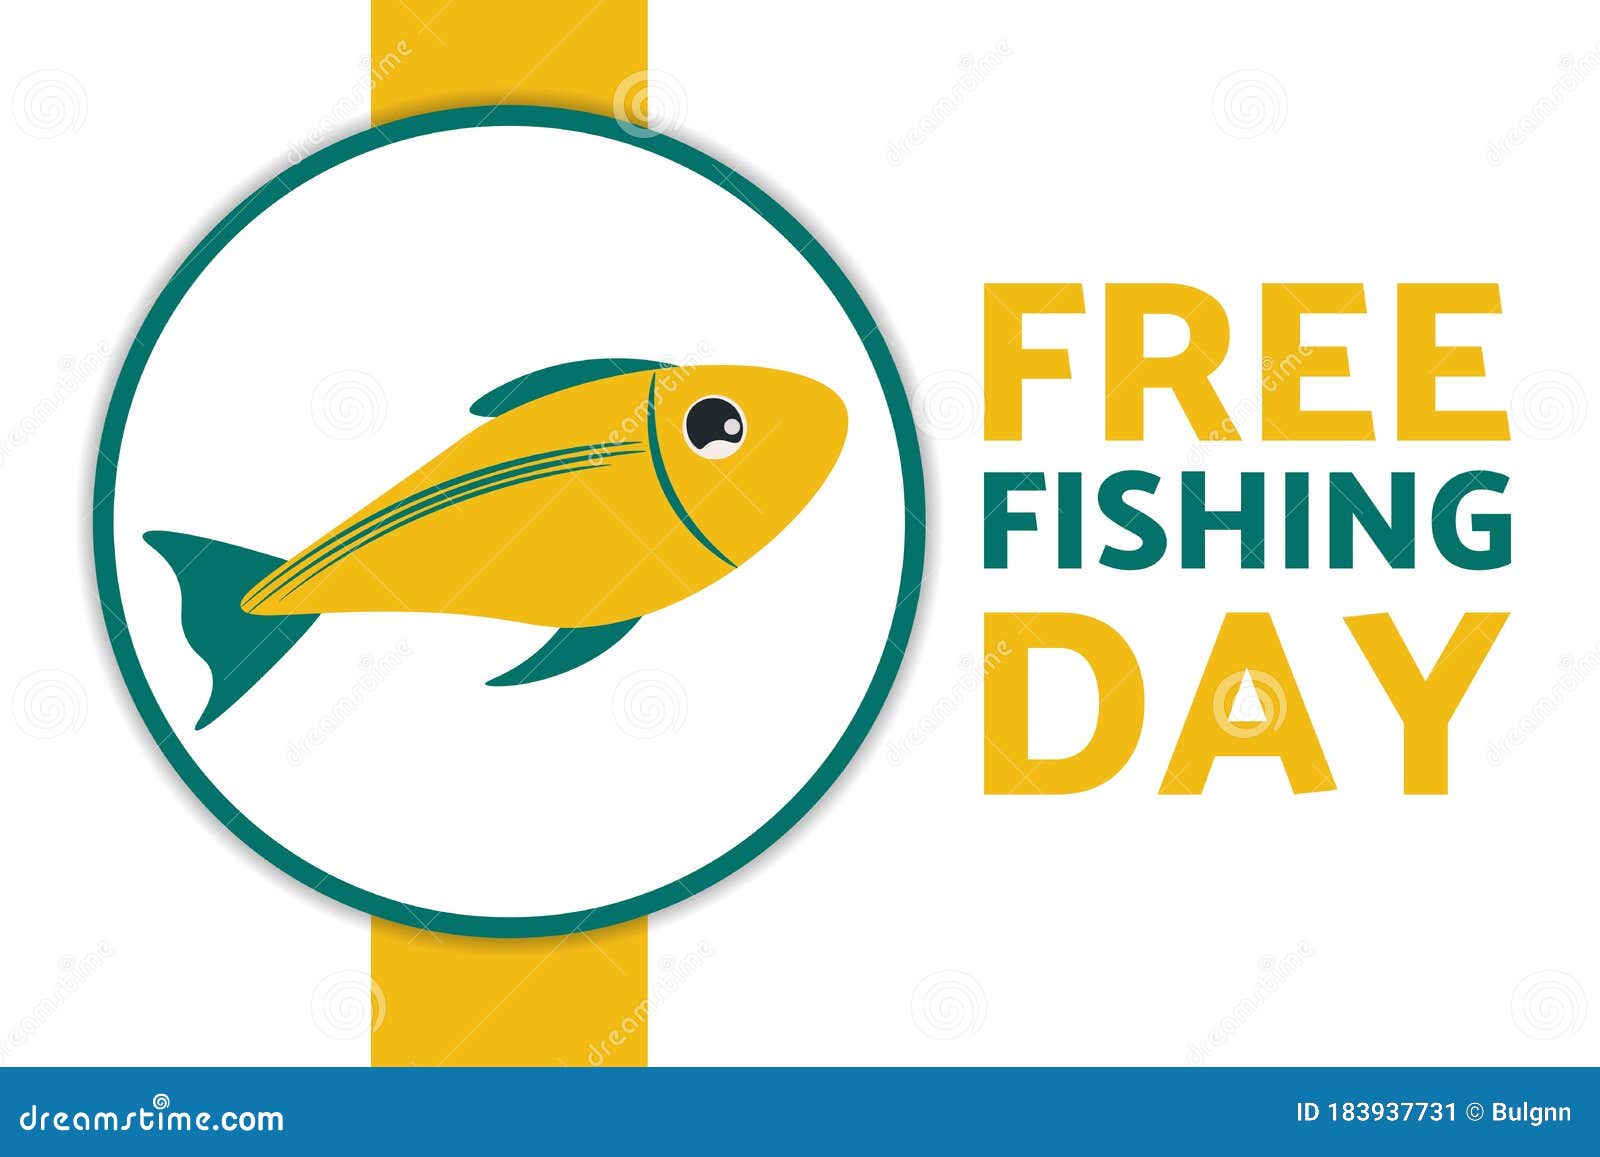 Free Fishing Day Concept. Template for Background, Banner, Card, Poster